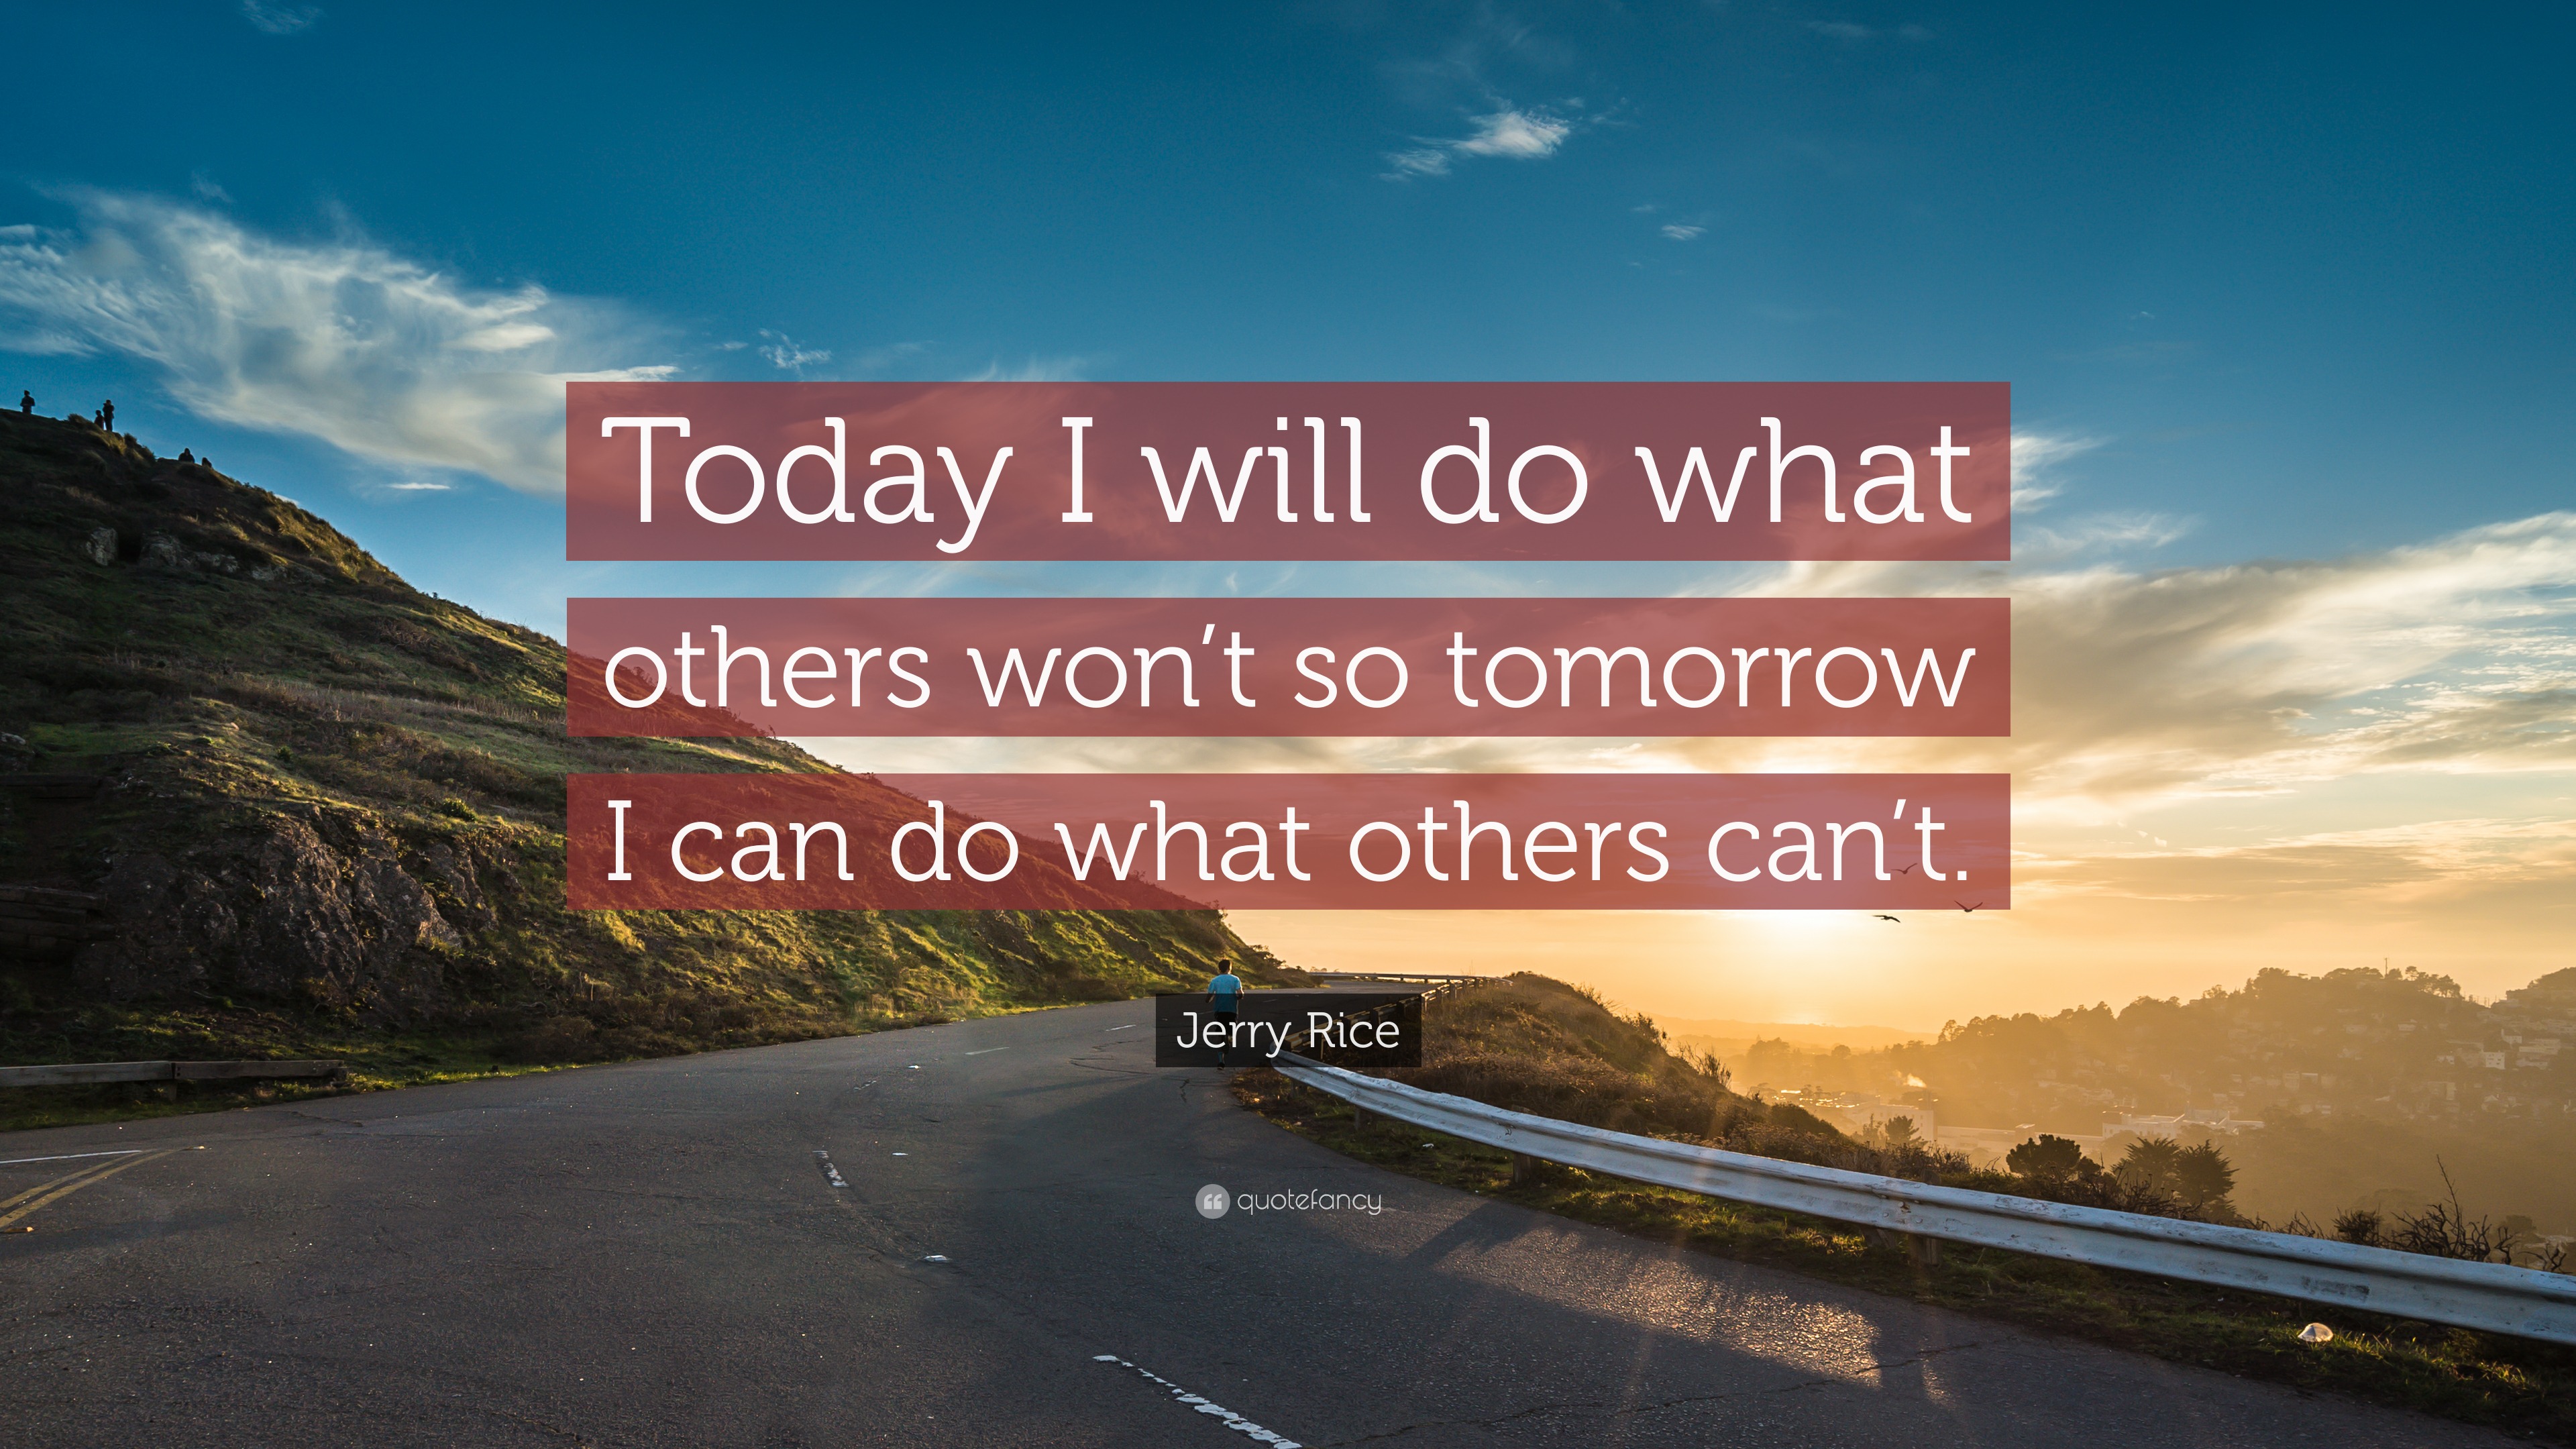 Today I will do what others won't, so tomorrow I can accomplish what others  can't -- Jerry Rice